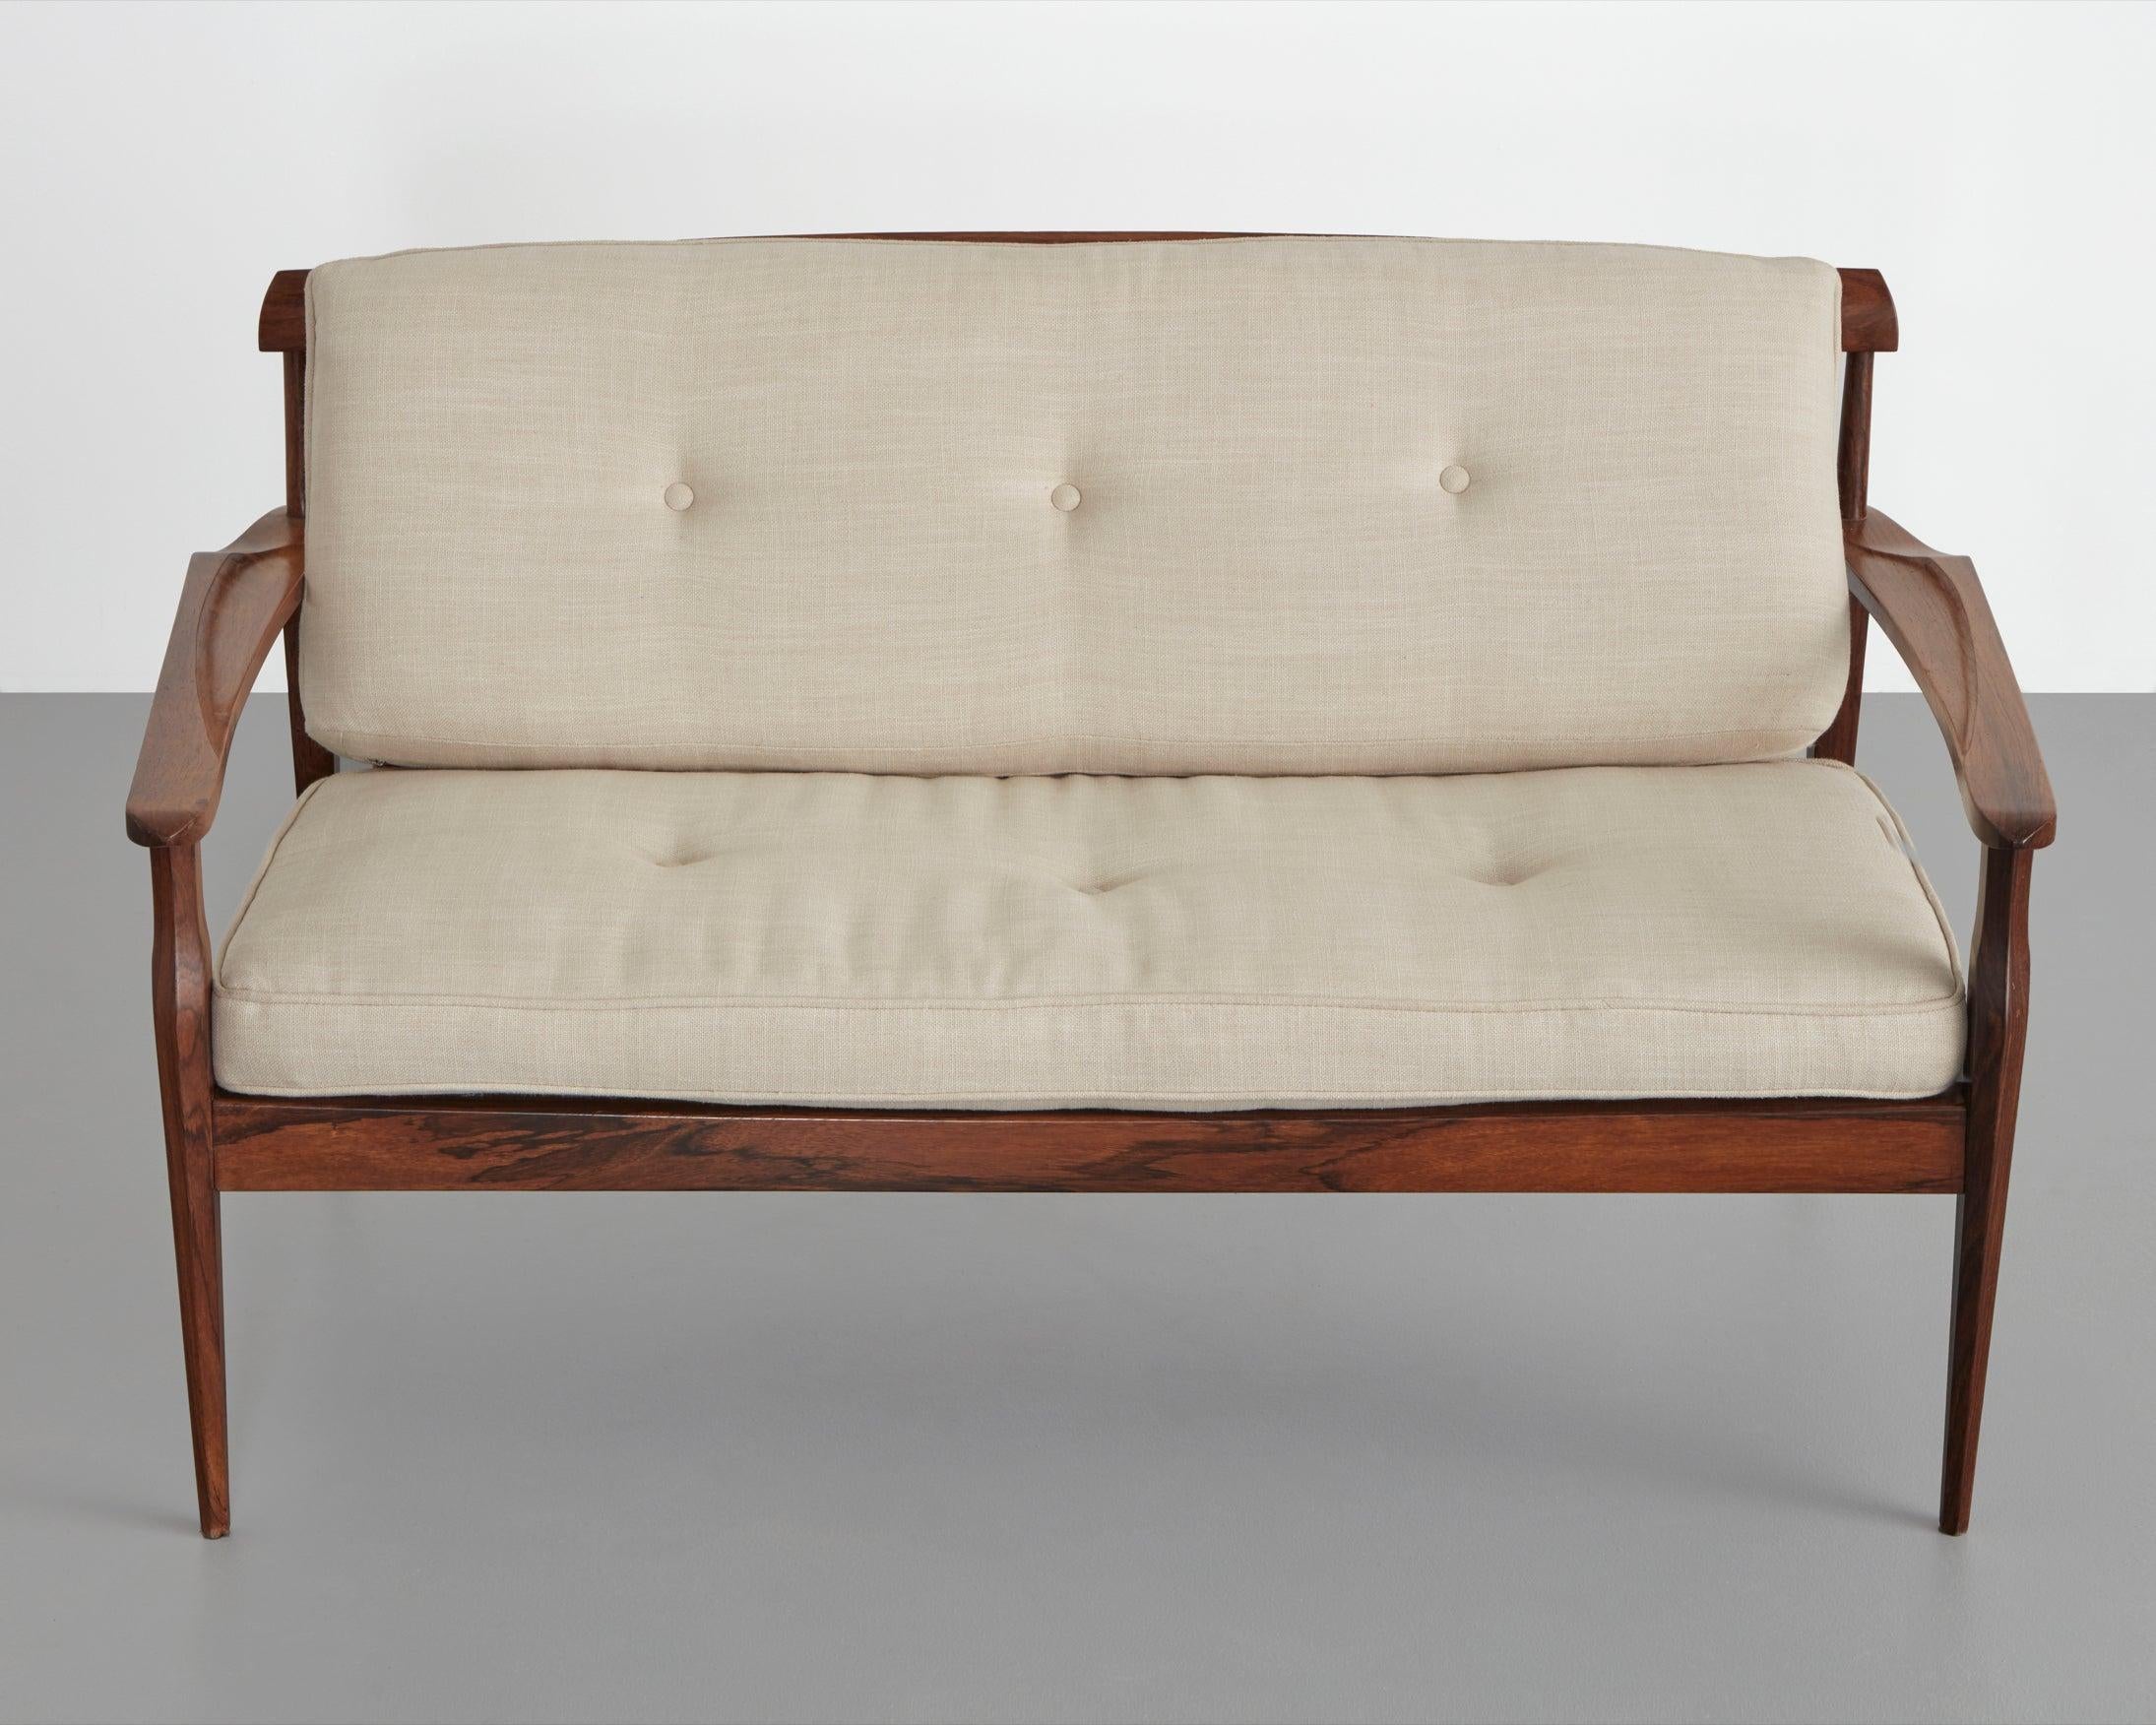 Two-Seat Sofa with Rosewood Frame Designed by Joaquim Tenreiro In Good Condition For Sale In New York, NY